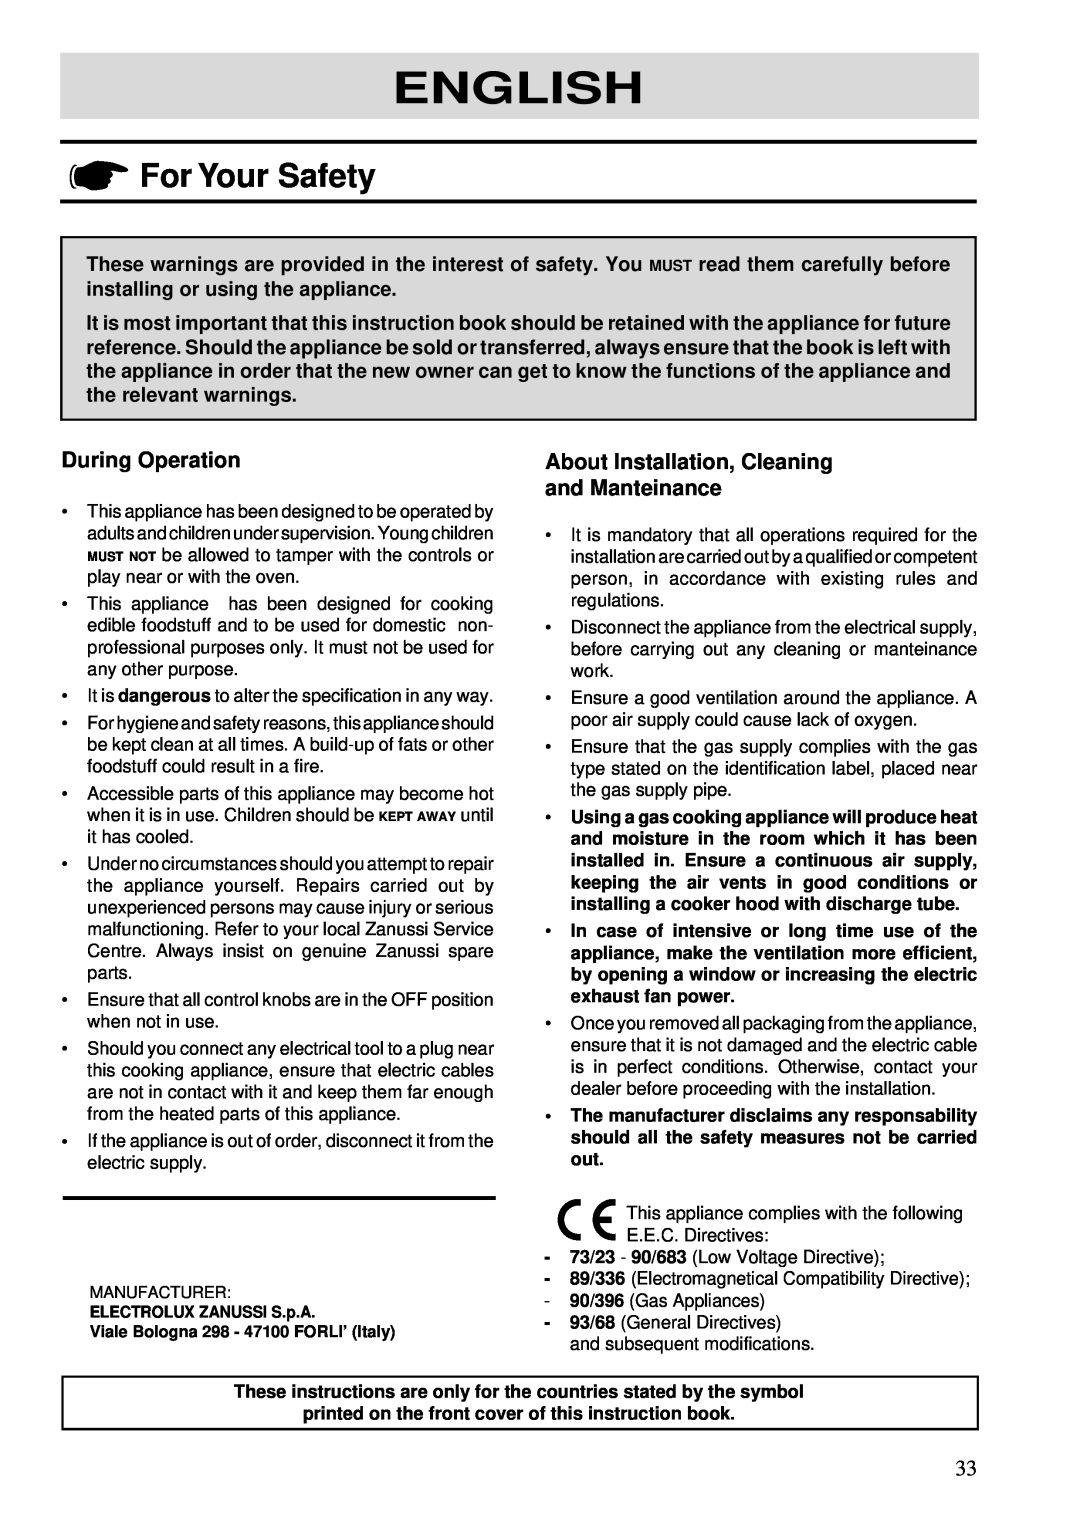 Zanussi ZGF 643 manual For Your Safety, During Operation, About Installation, Cleaning and Manteinance, English 